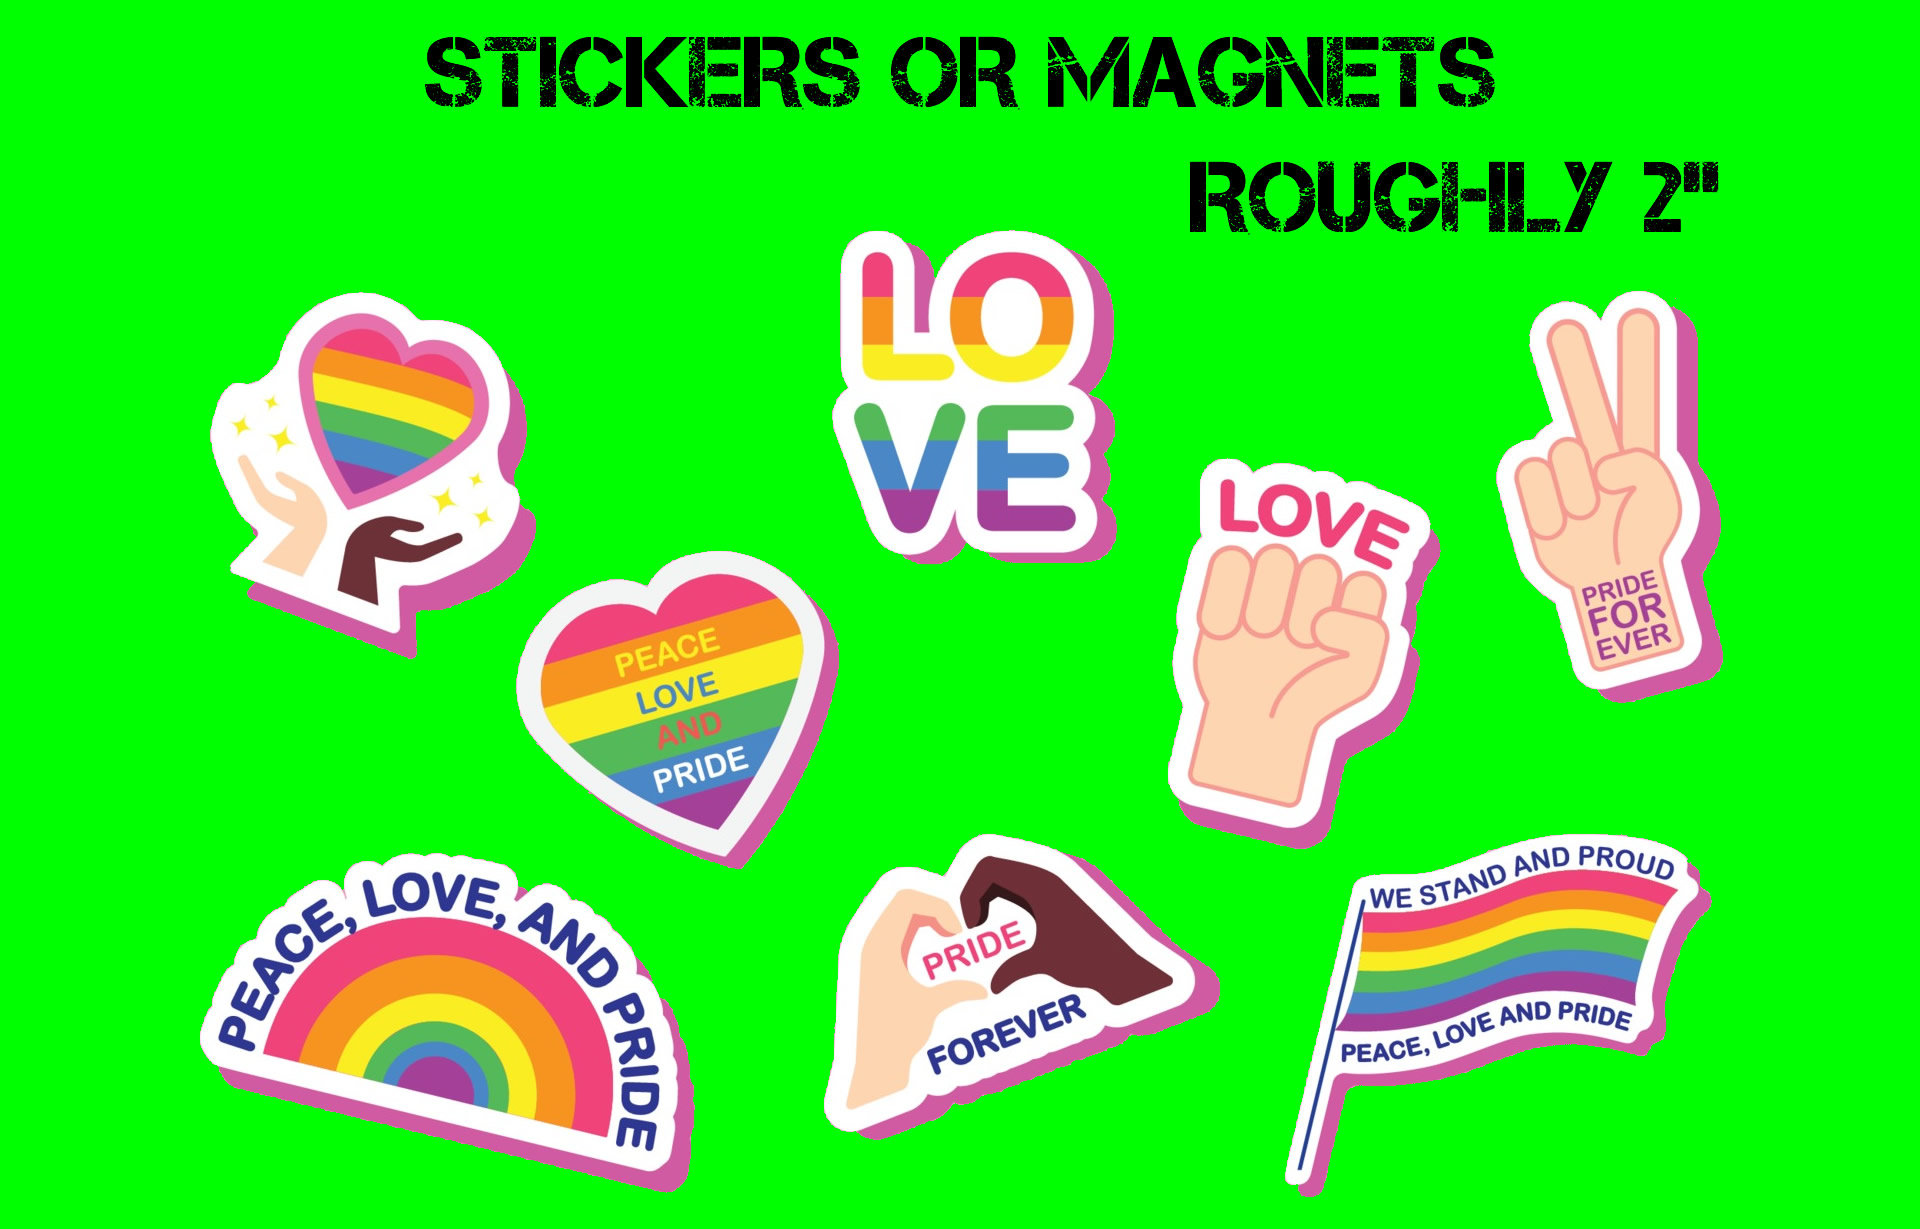 King Of Stickers 8 fun PRIDE stickers or magnets roughly 2 inch in various materials laminated